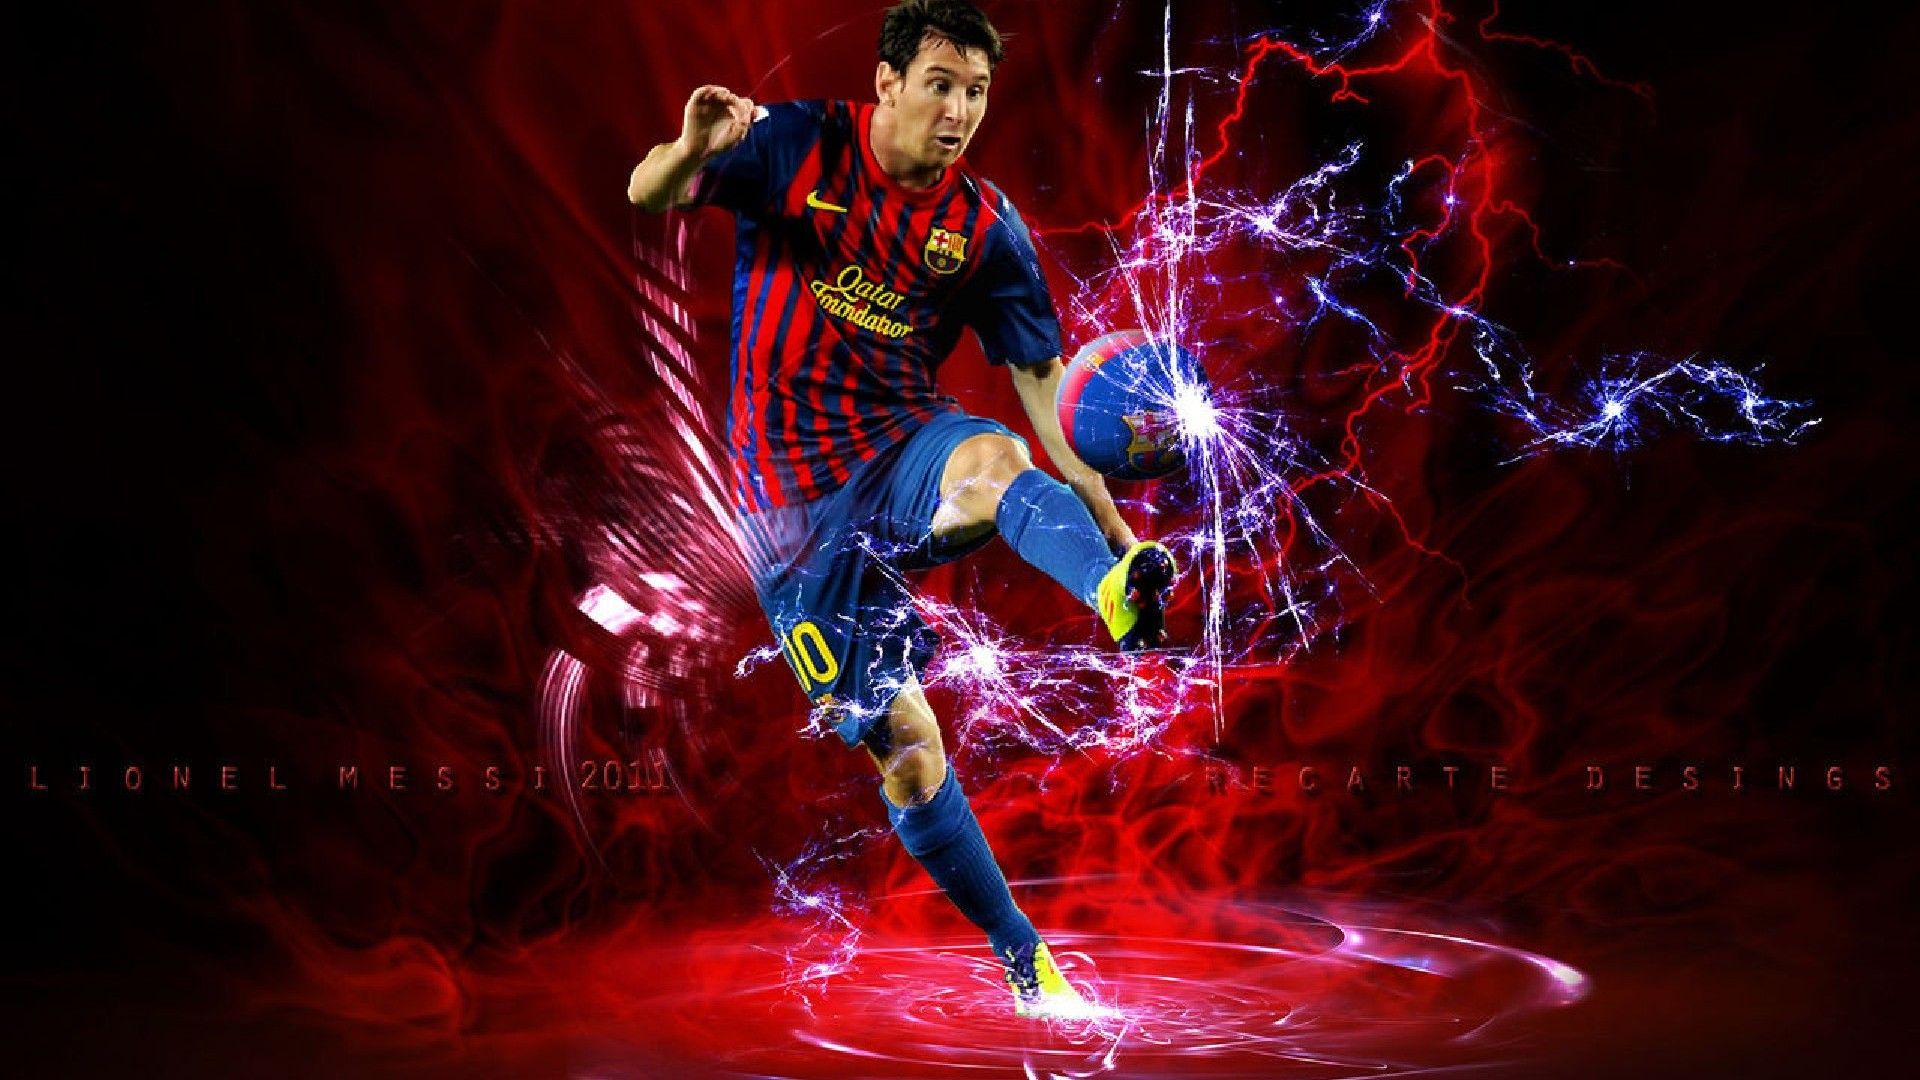 Lionel Messi Wallpaper 13 Hd Background 9 HD Wallpapers amagico